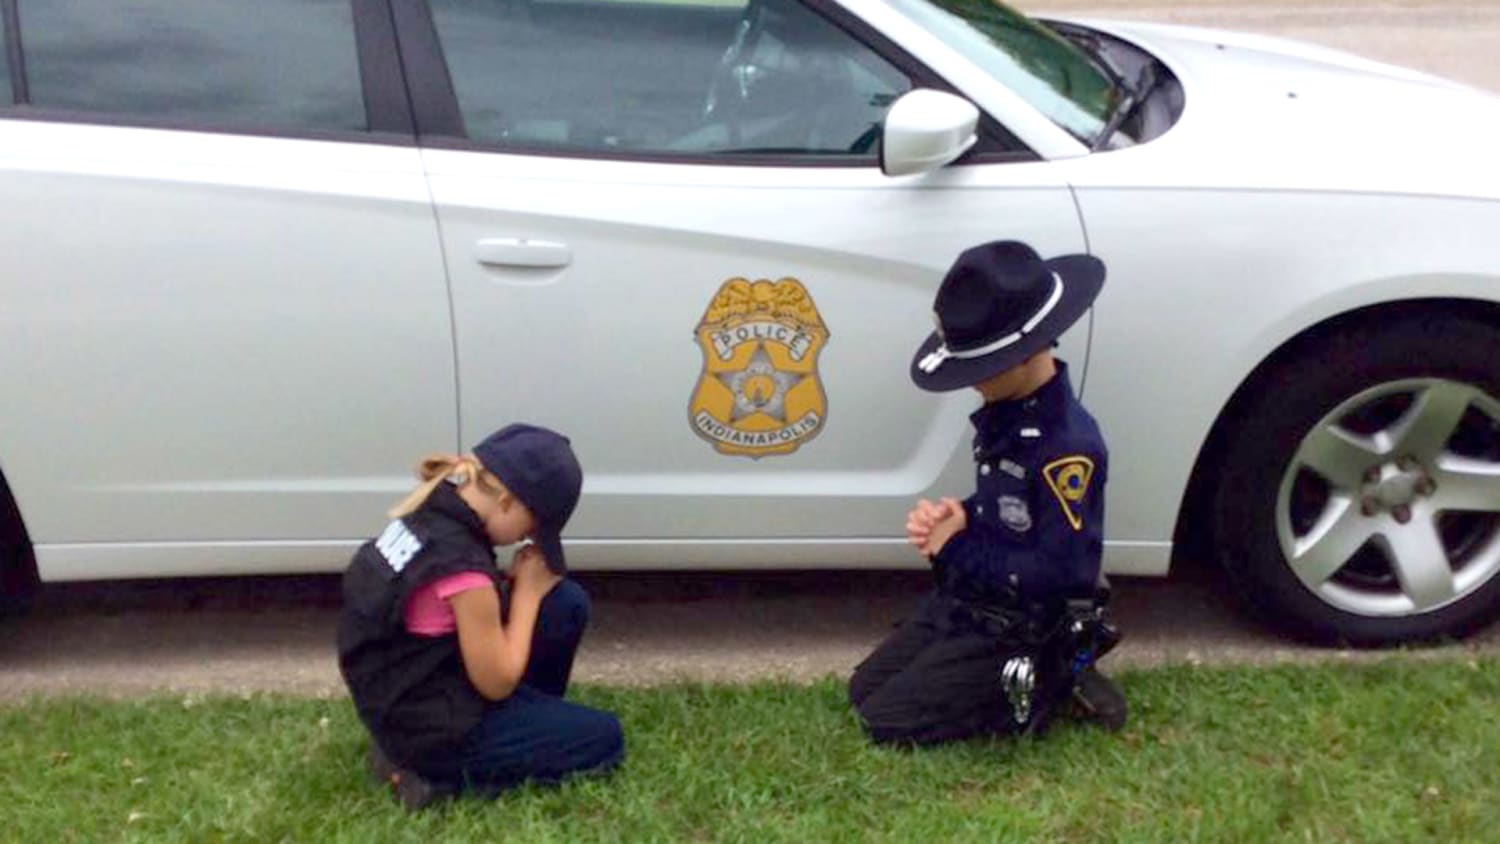 Powerful photo shows children of police officer praying he comes home safely - TODAY.com1920 x 1080